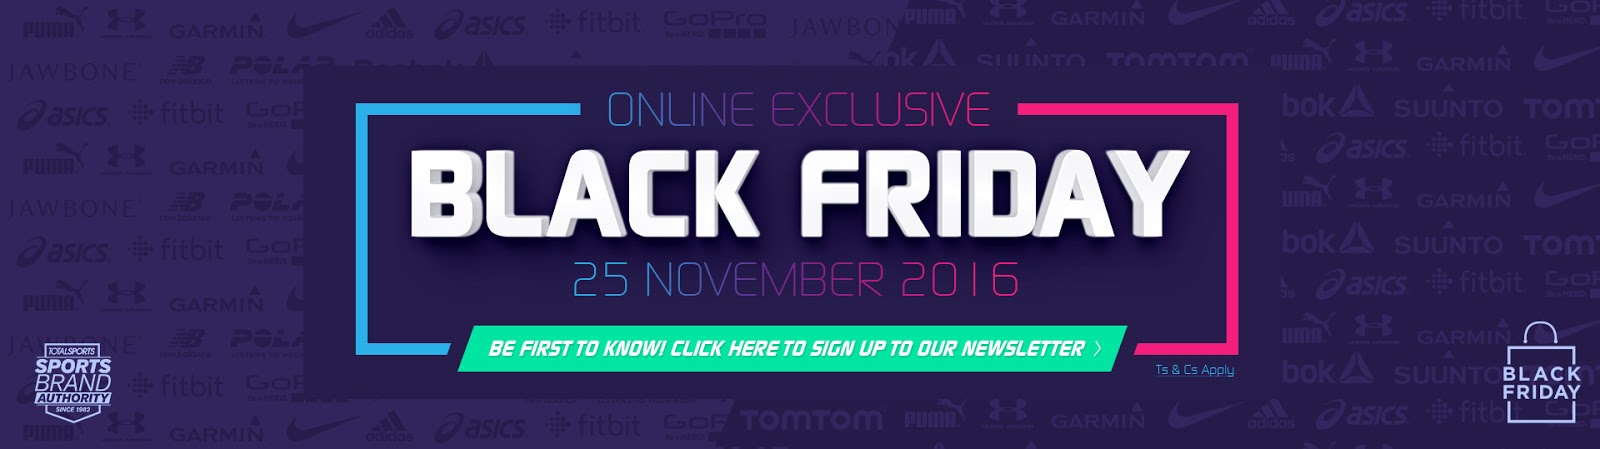 #BlackFriday Totalsports Black Friday deals in South Africa - Online Scoops